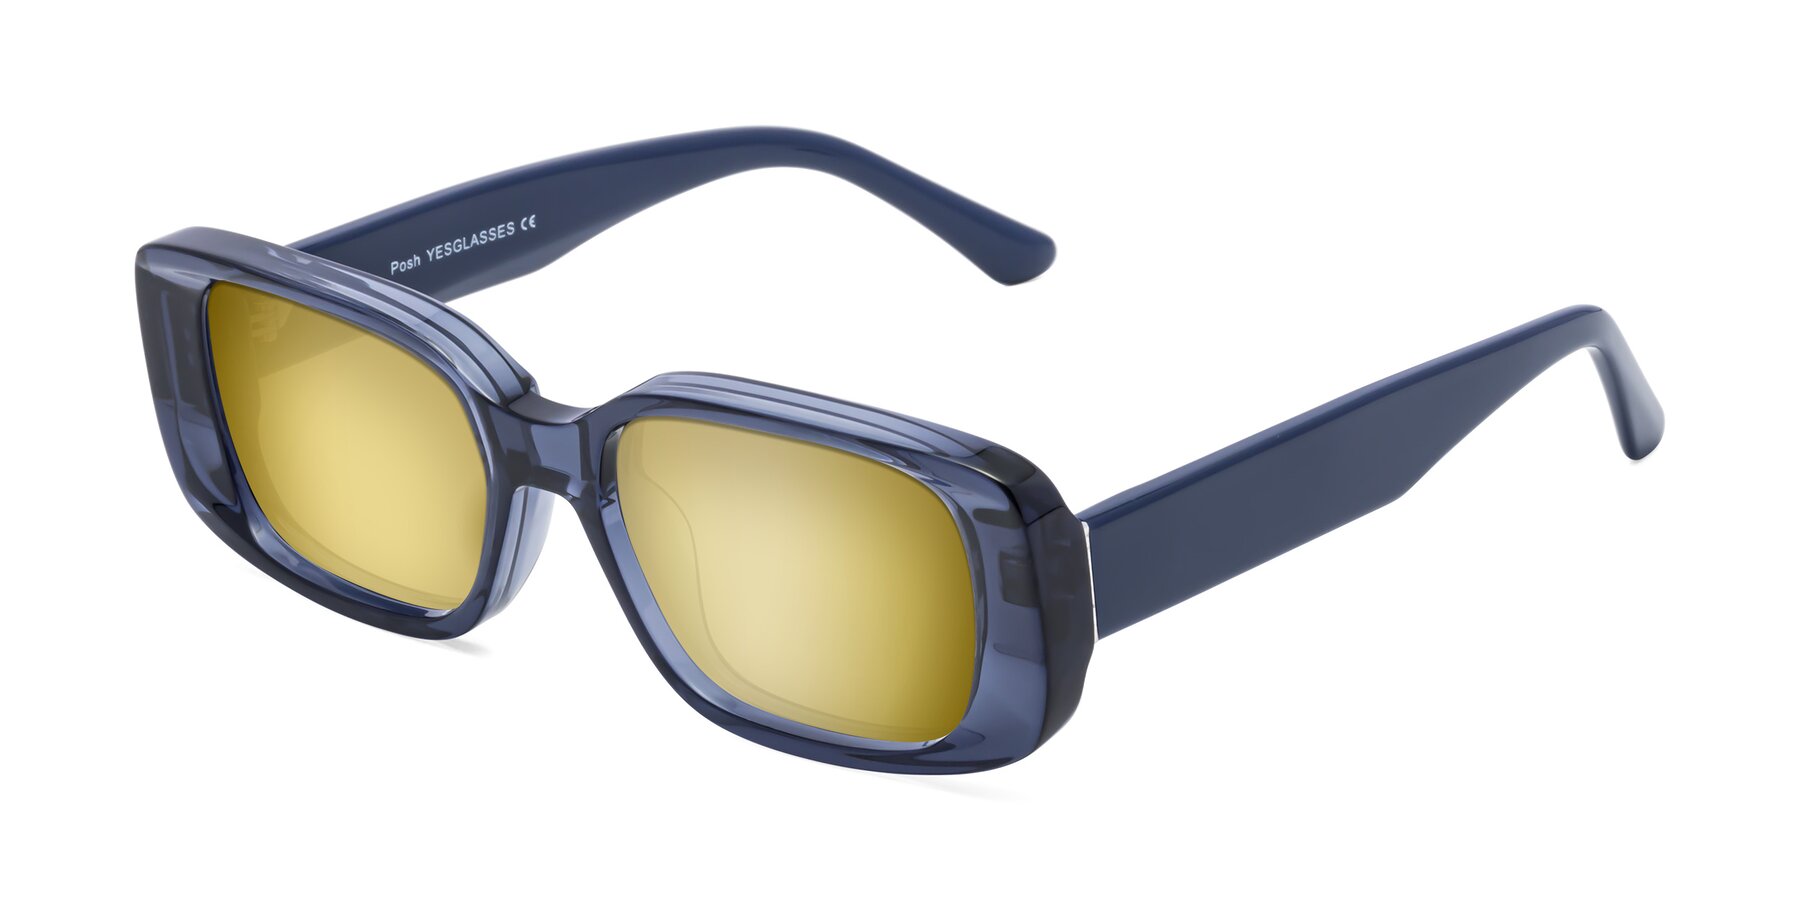 Angle of Posh in Translucent Blue with Gold Mirrored Lenses